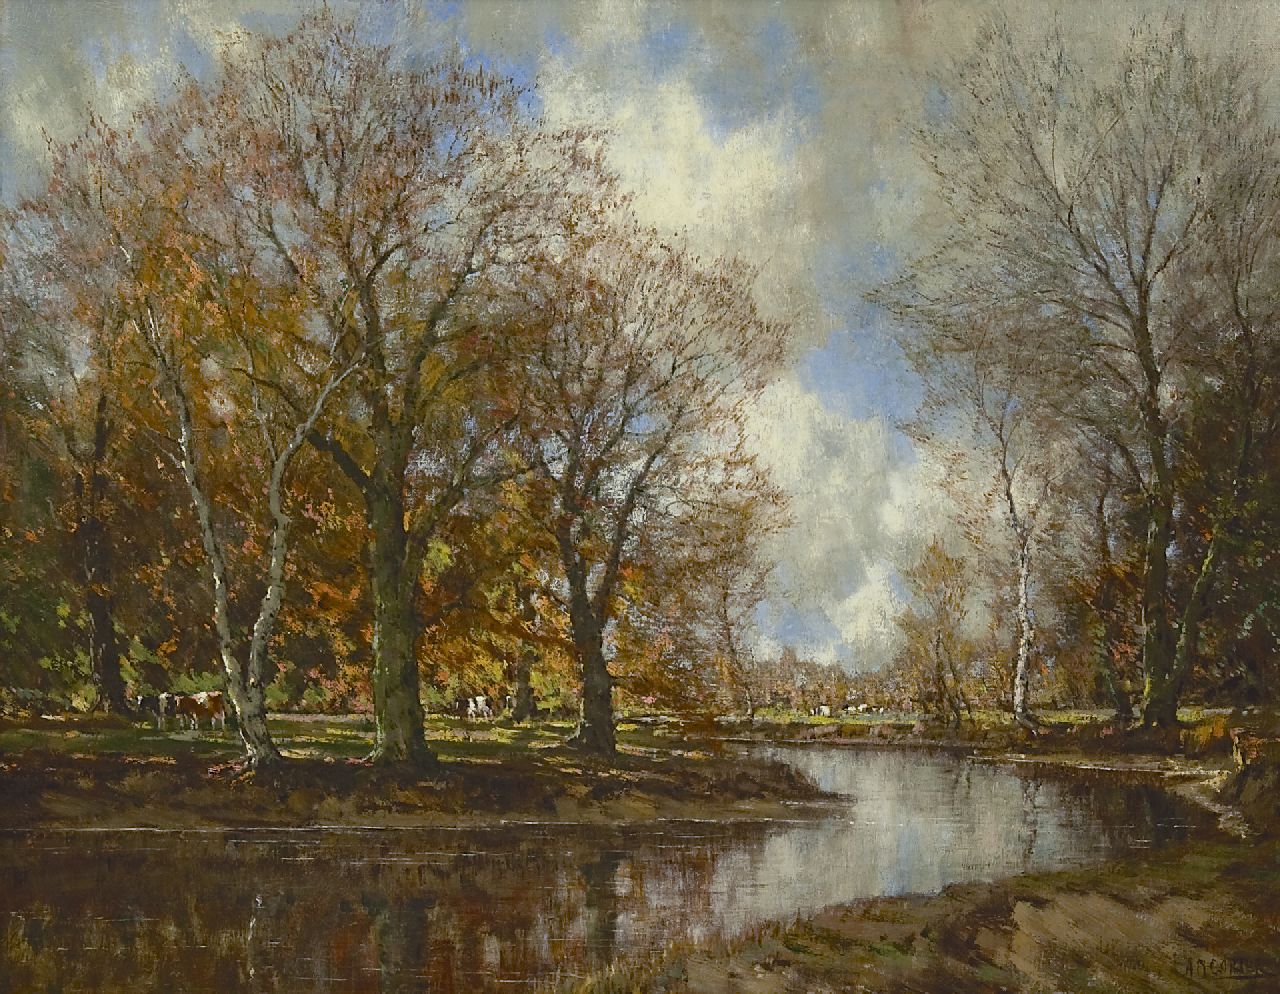 Gorter A.M.  | 'Arnold' Marc Gorter, Cows under trees near a stream, oil on canvas 70.2 x 90.5 cm, signed l.r.